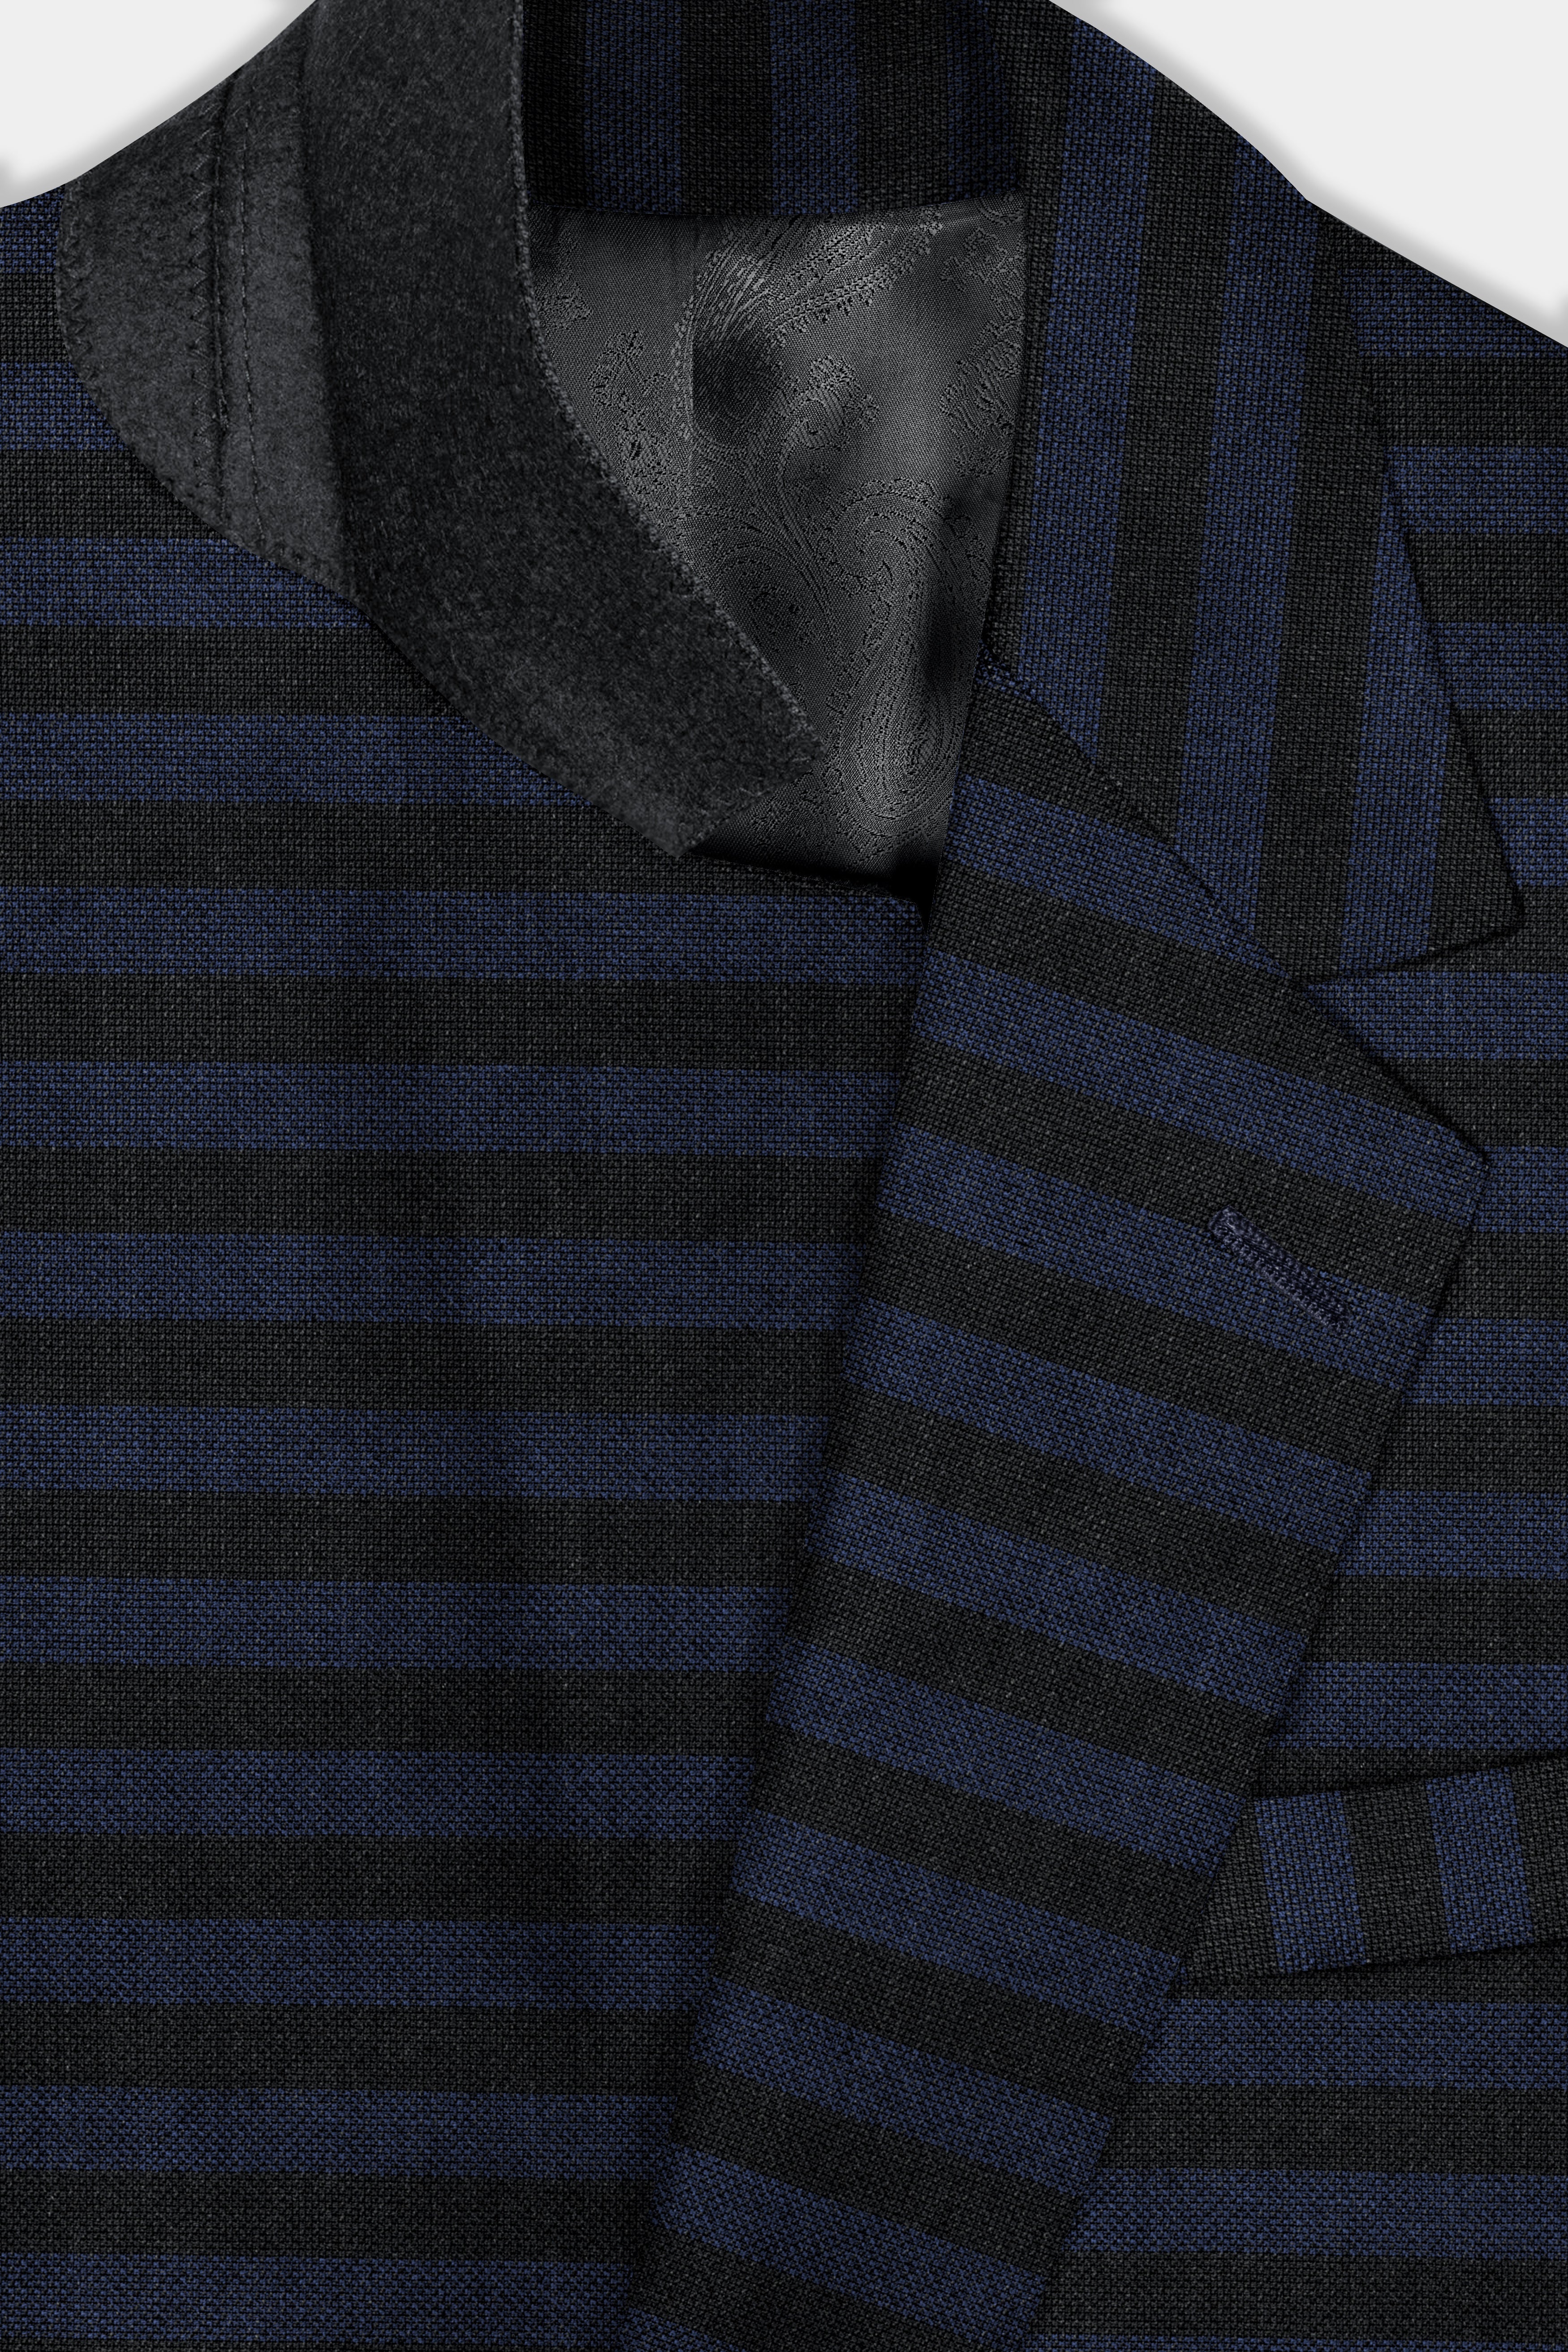 Mirage Blue and Black Striped Wool Blend Suit